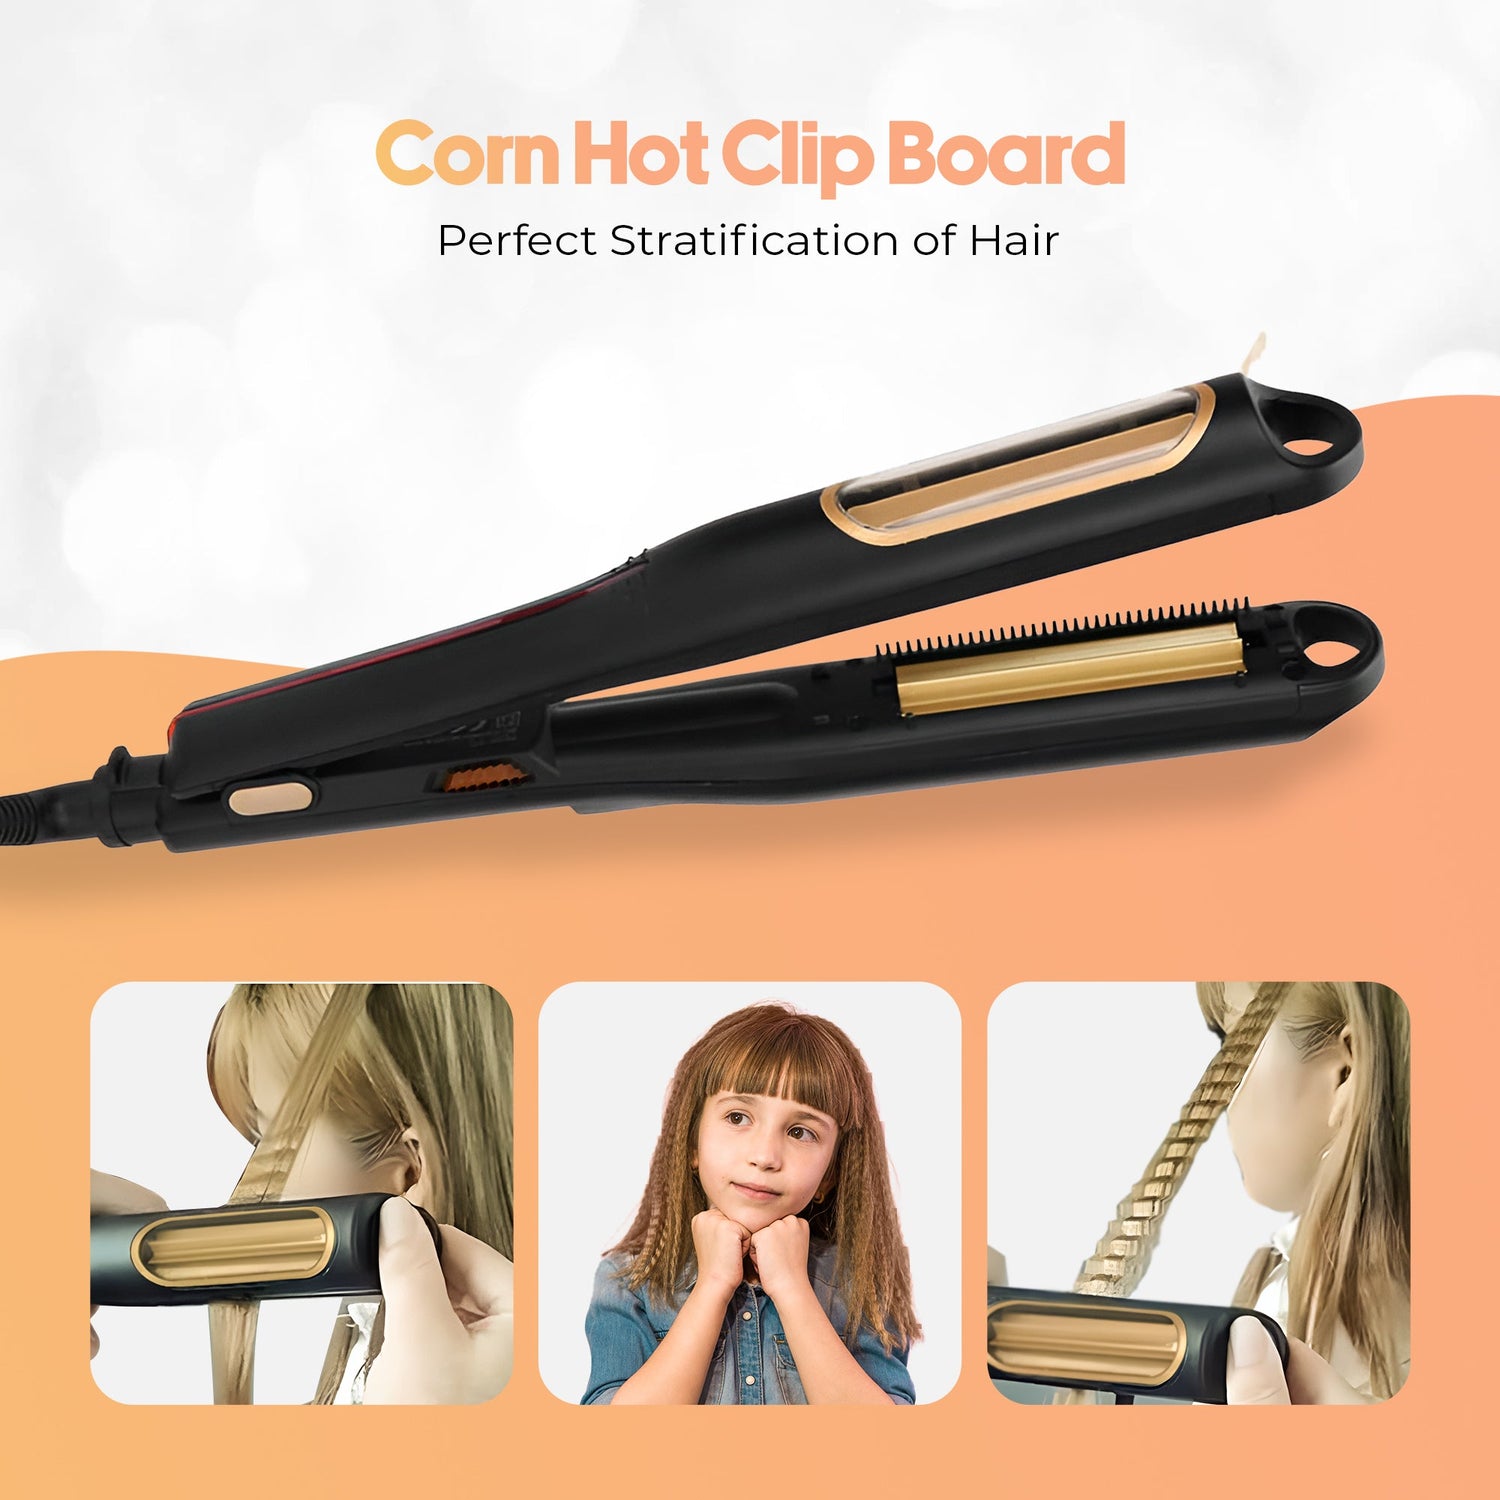 Couture Hair Pro Automatic Hair Crimper Iron - Limited Lifetime Warranty - Couture Hair Pro